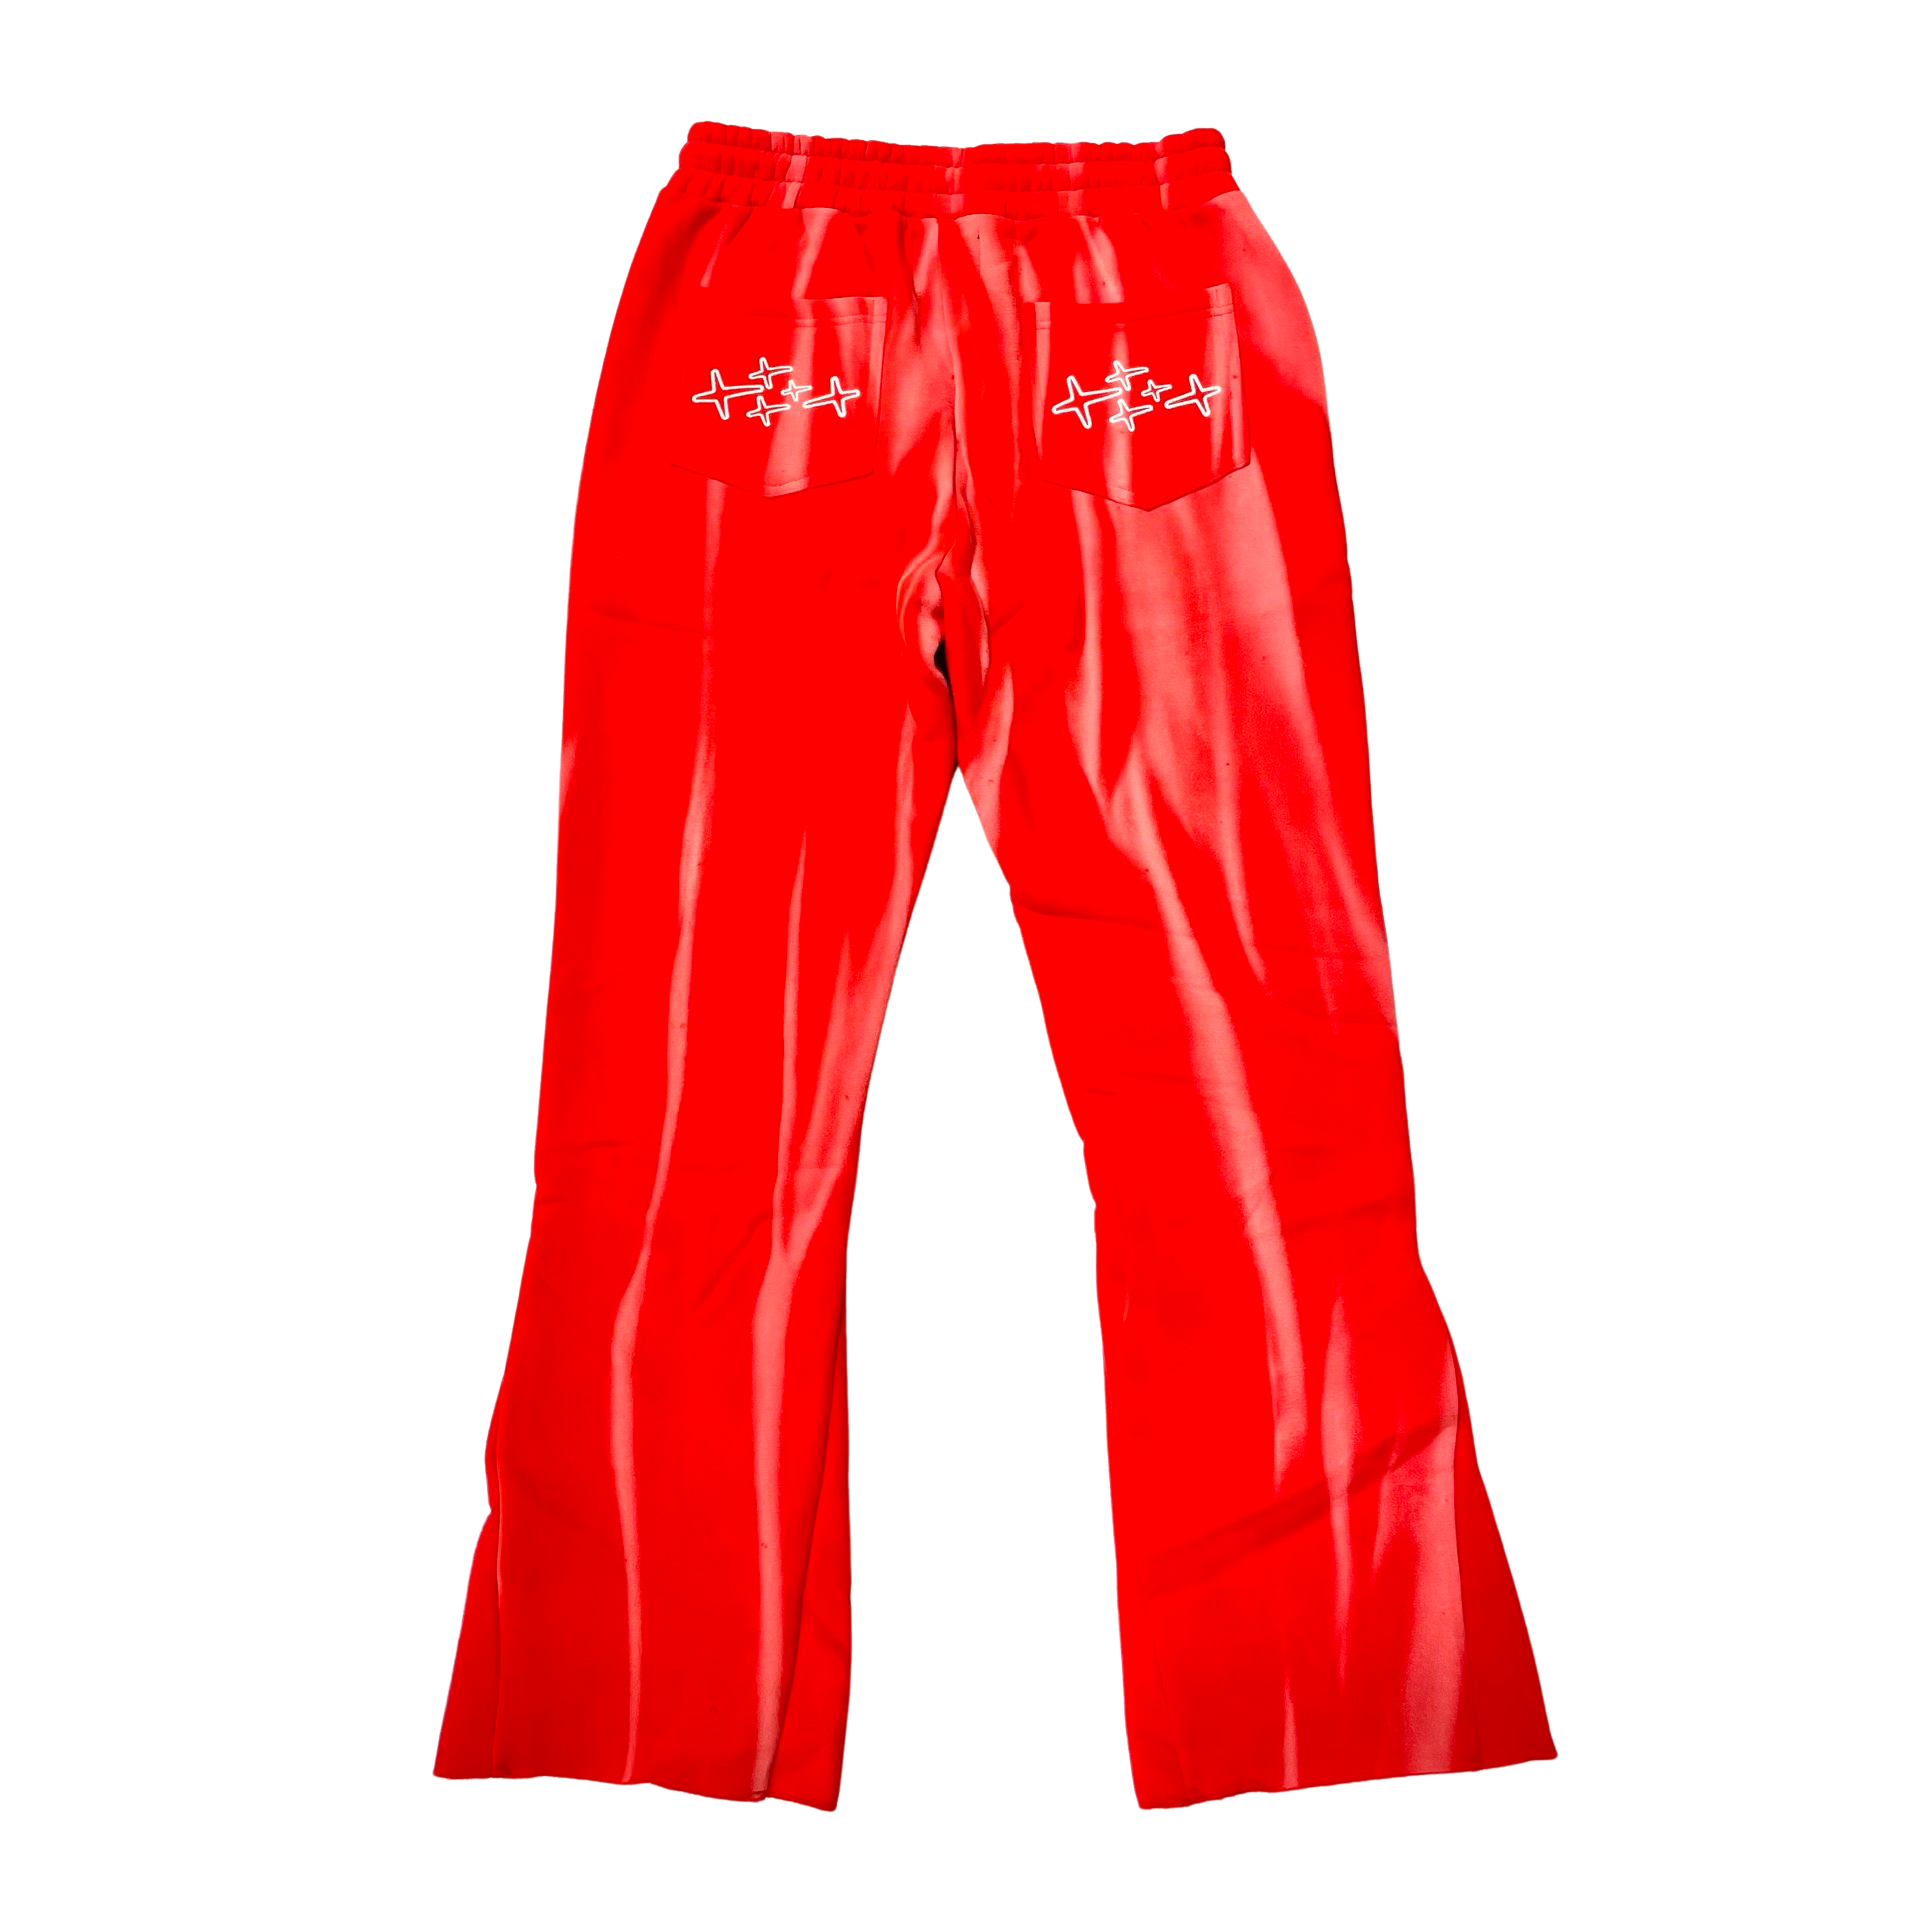 Retrovert Flared Fire Red Sweatpants